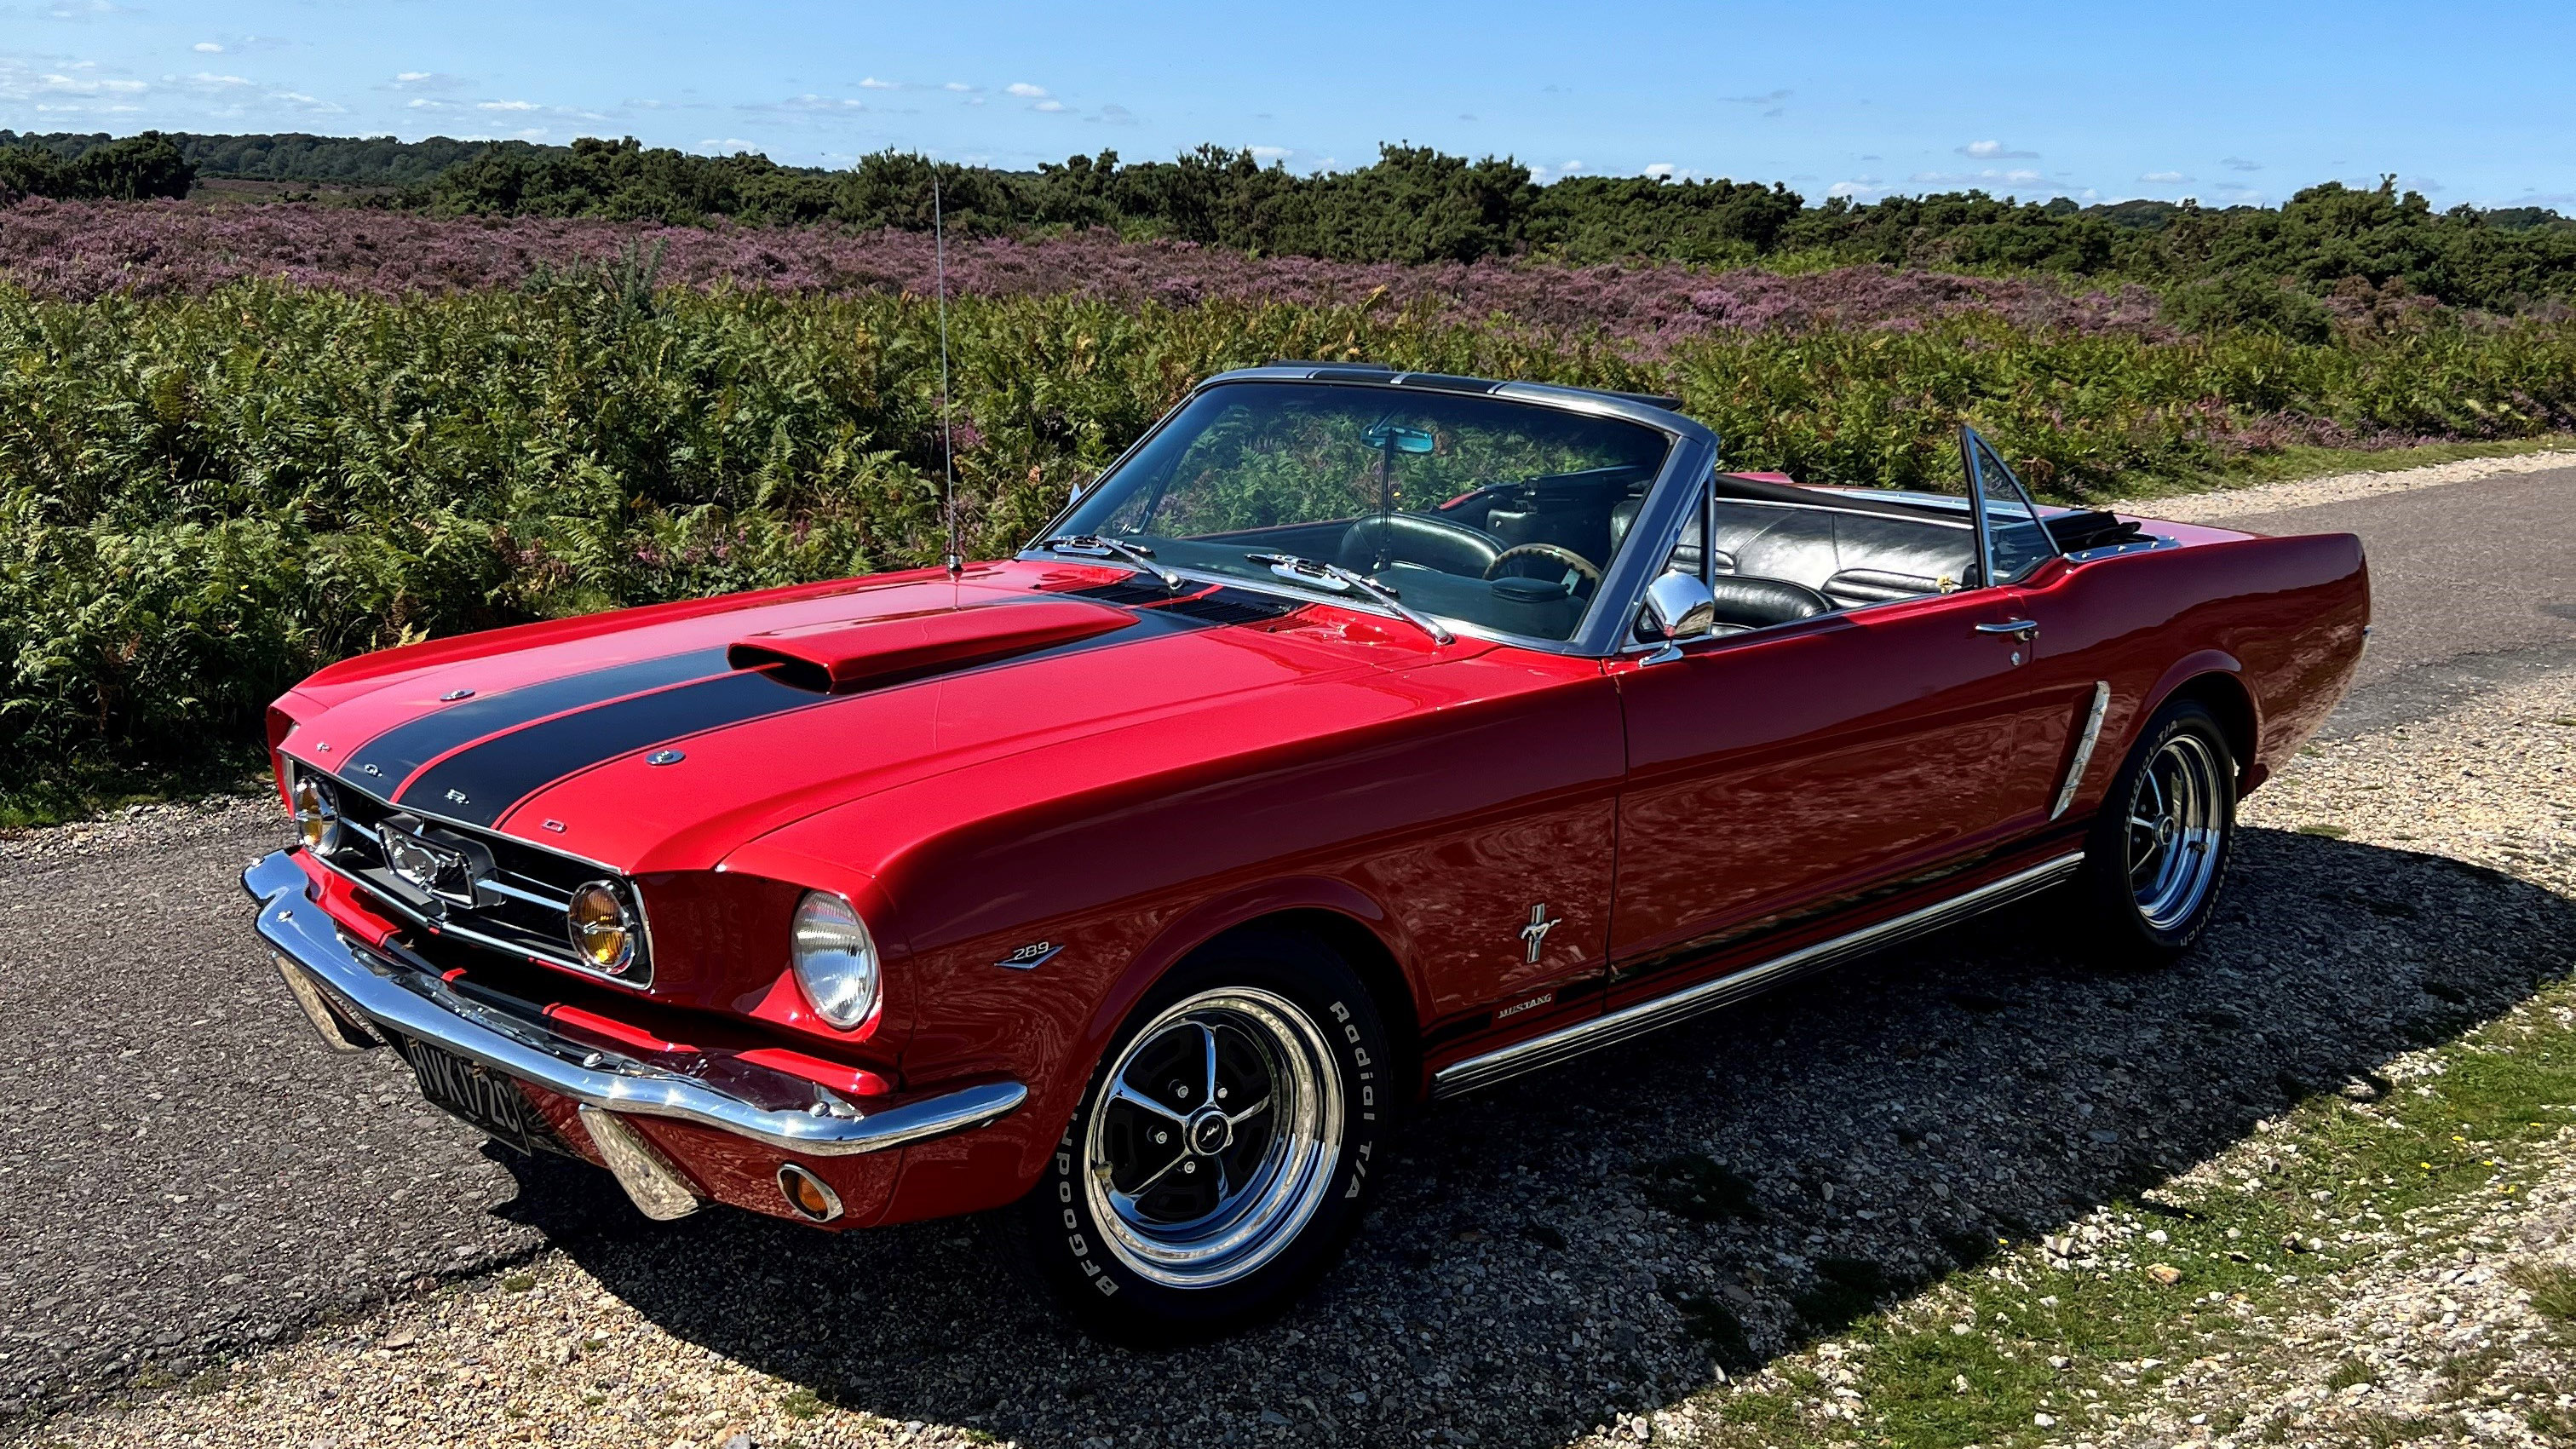 Classic Red Mustang Convertible with roof down